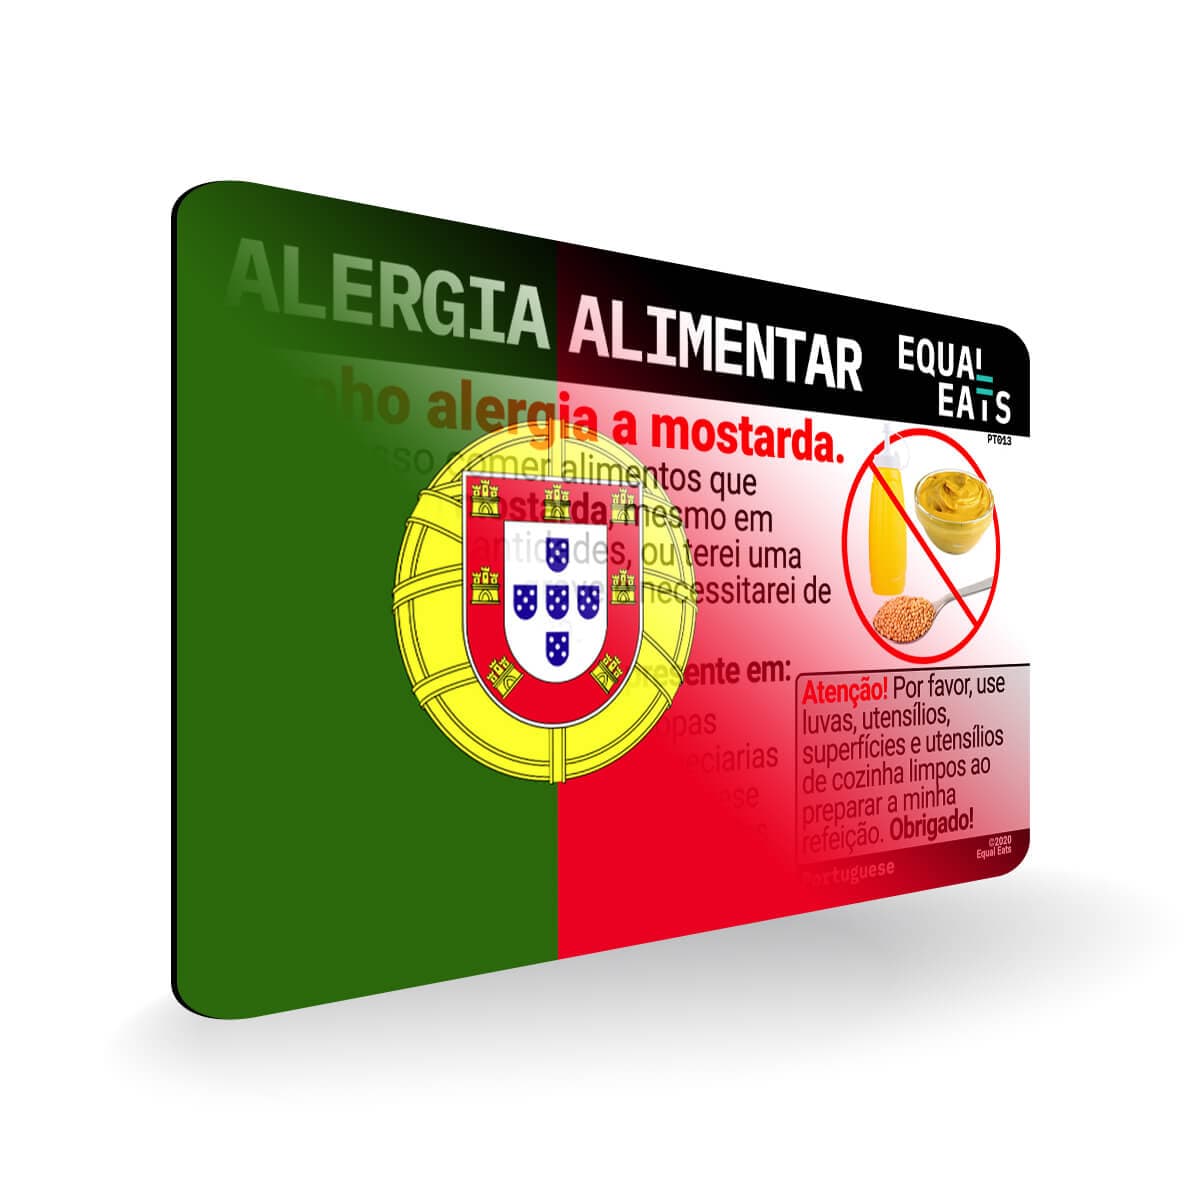 Mustard Allergy in Portuguese. Mustard Allergy Card for Portugal